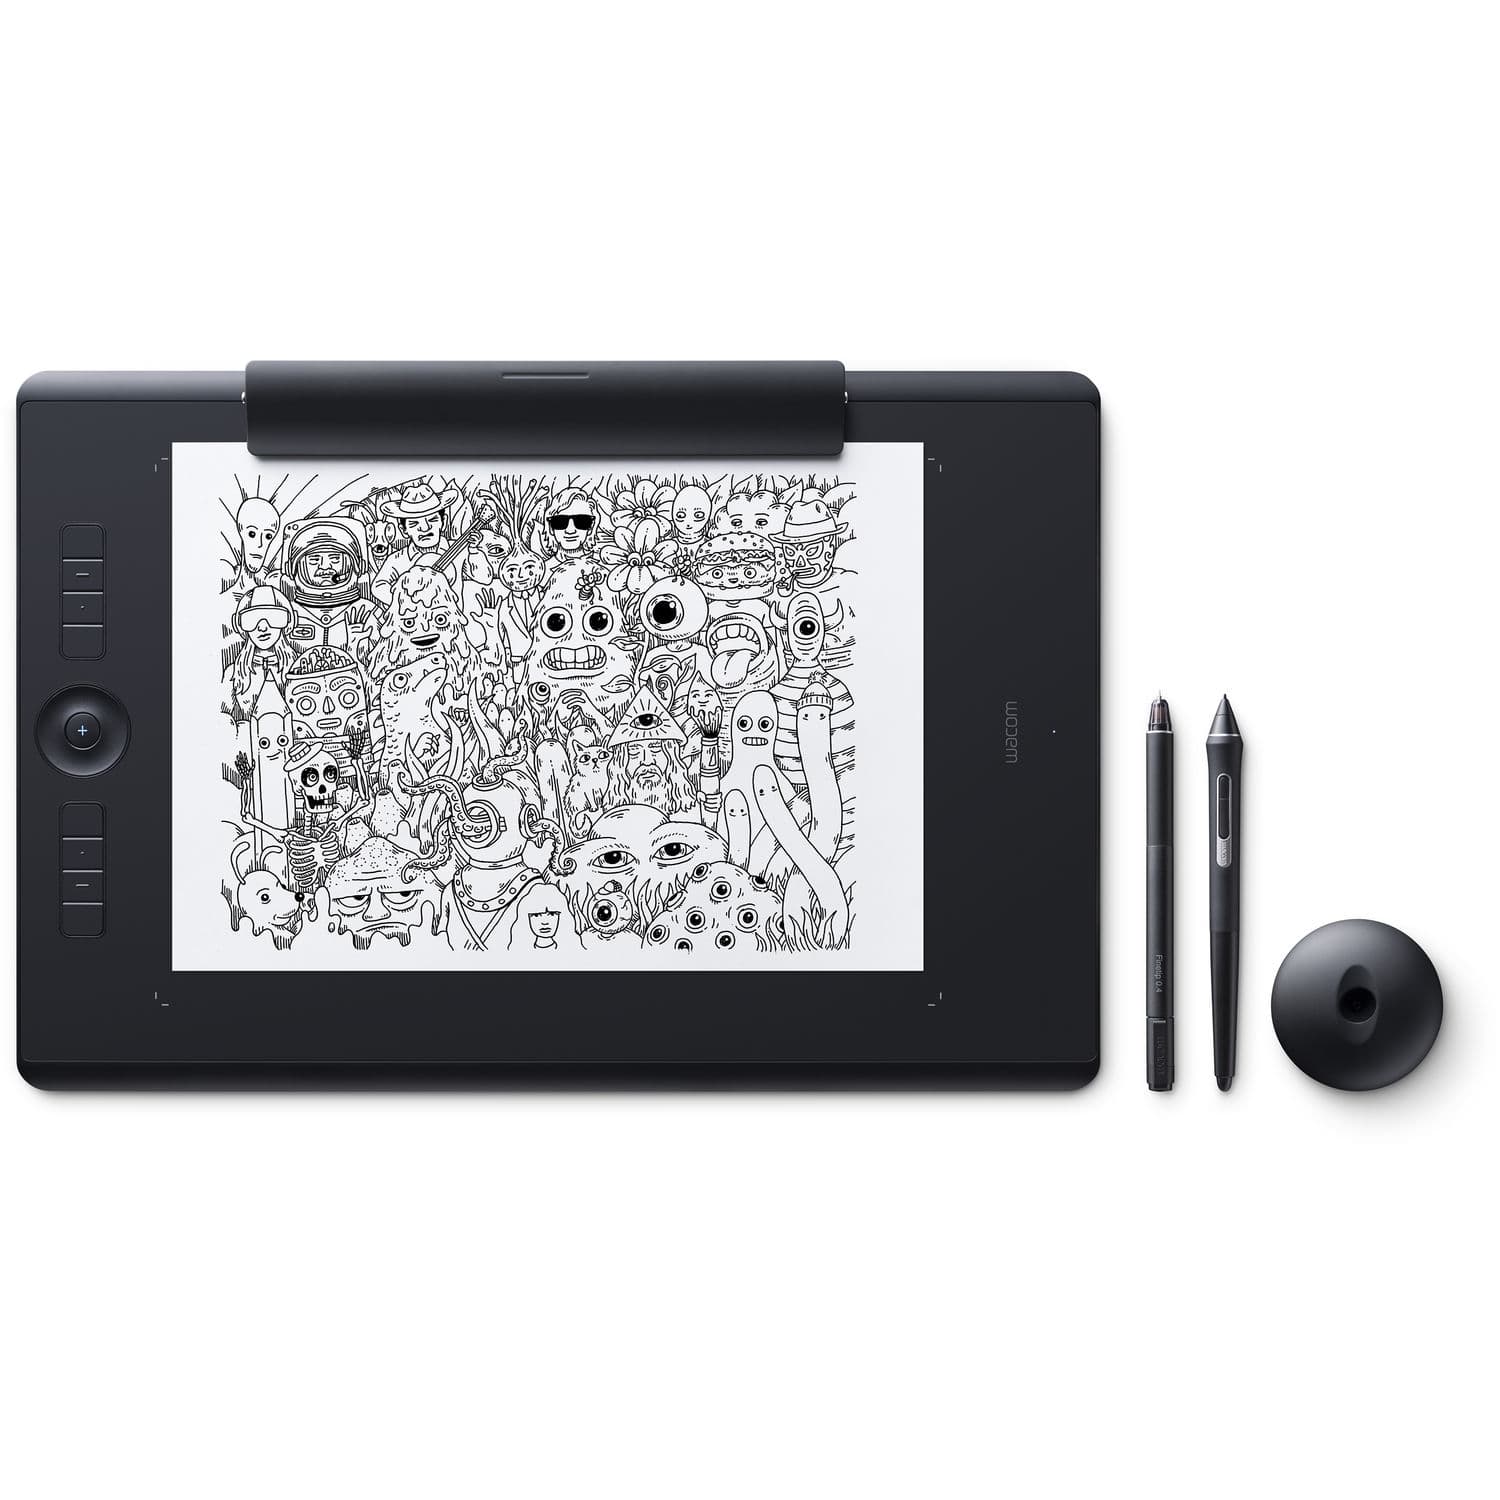 Wacom Intuos Pro Paper Edition M Drawing Graphic Tablet Board with Pro Pen 2 PTH-660/K1-CX